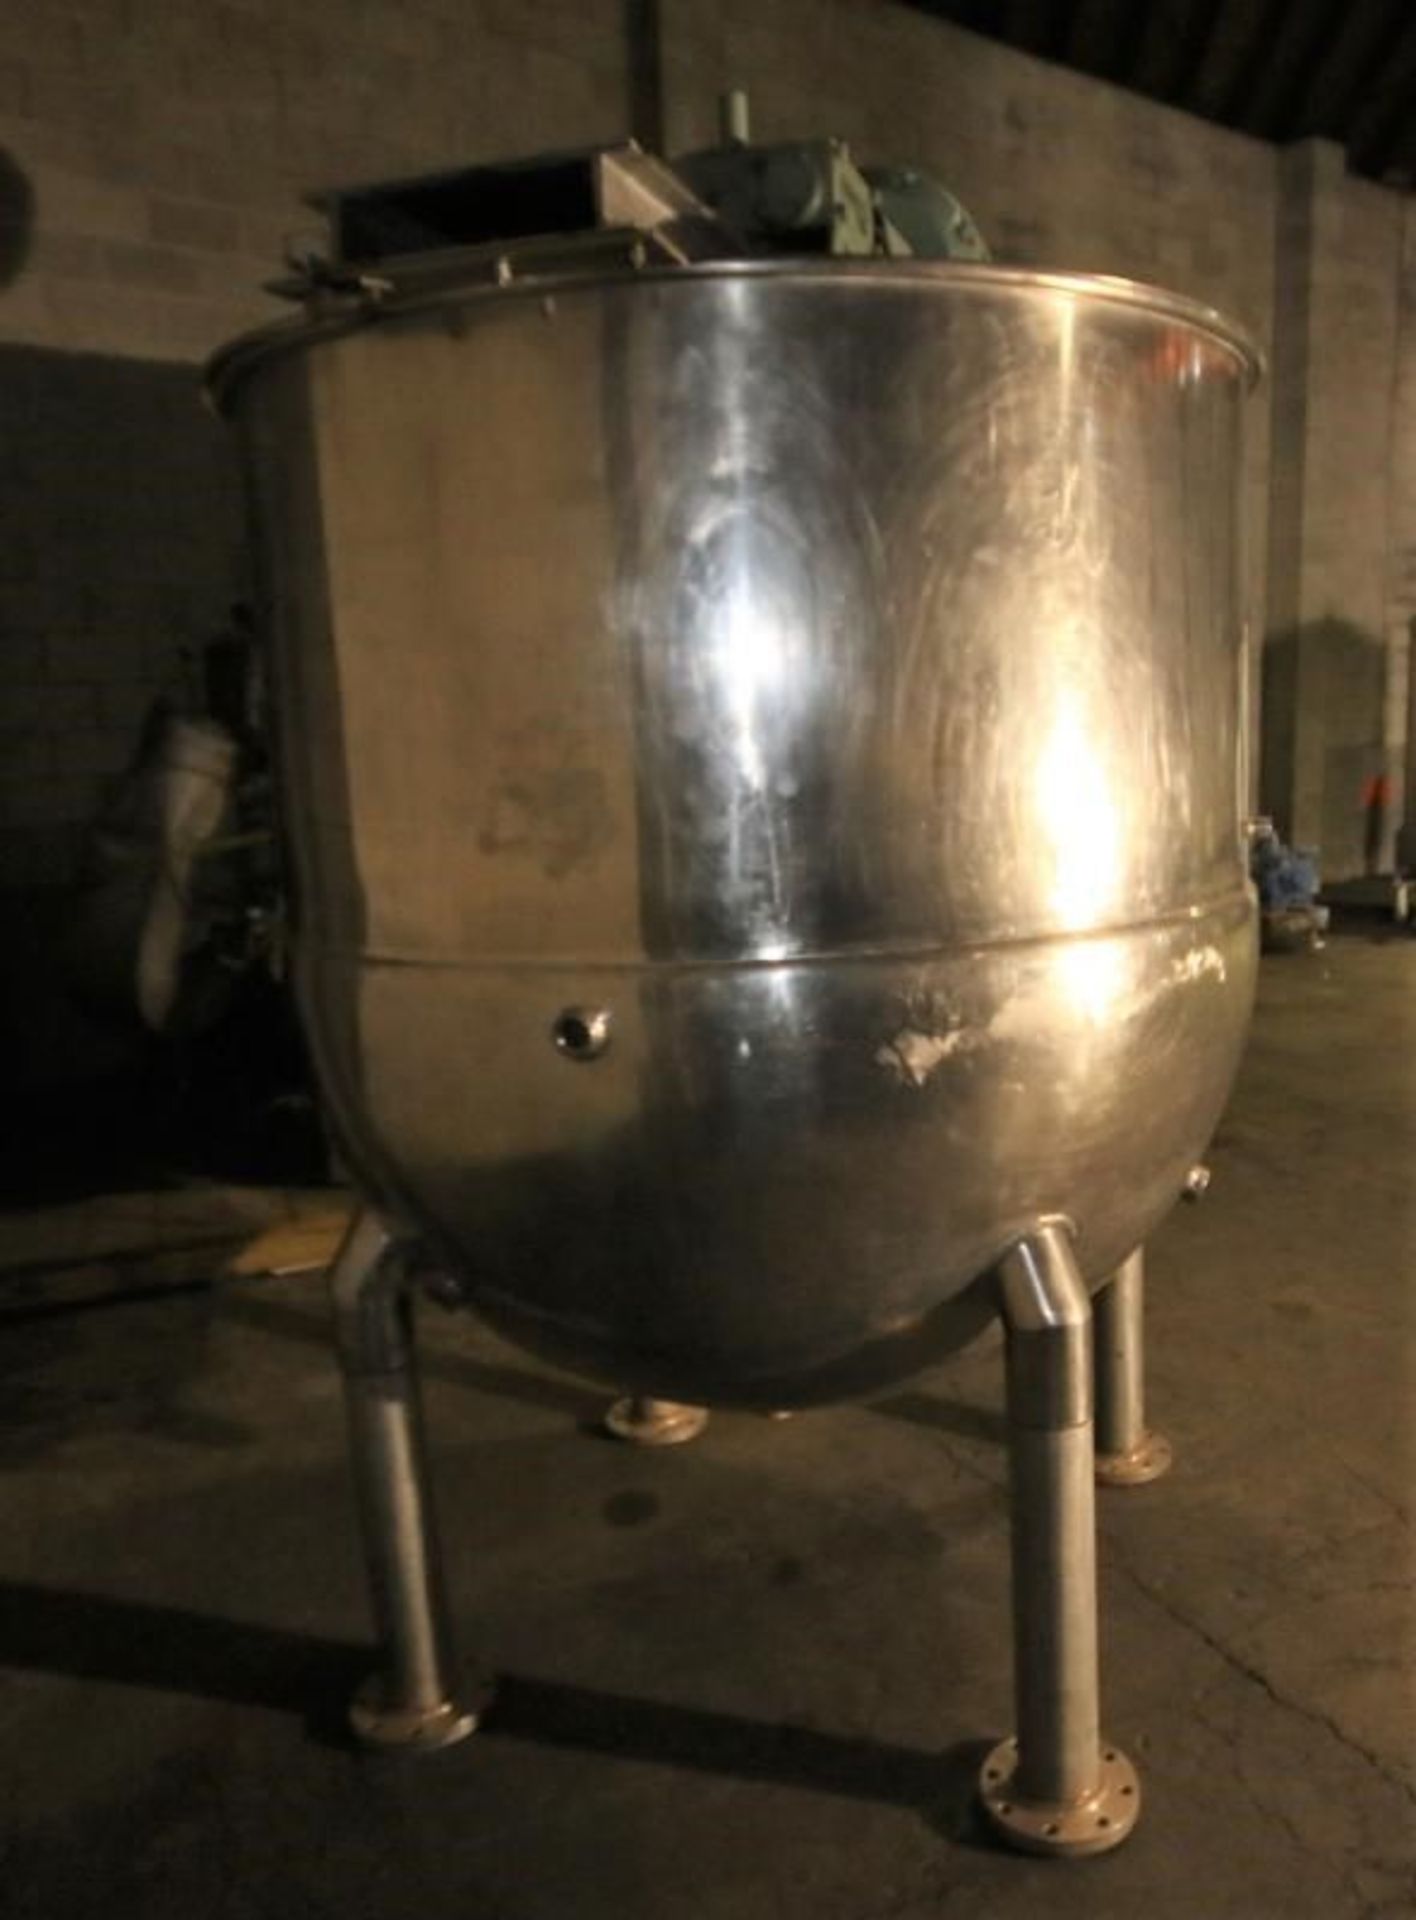 PPPE 650 Gal. Jacketed S/S Kettle, SN 1H3210Z0Z708, with S/S Bridge Agitator with 7.5 hp / 1755 RPM, - Image 6 of 10